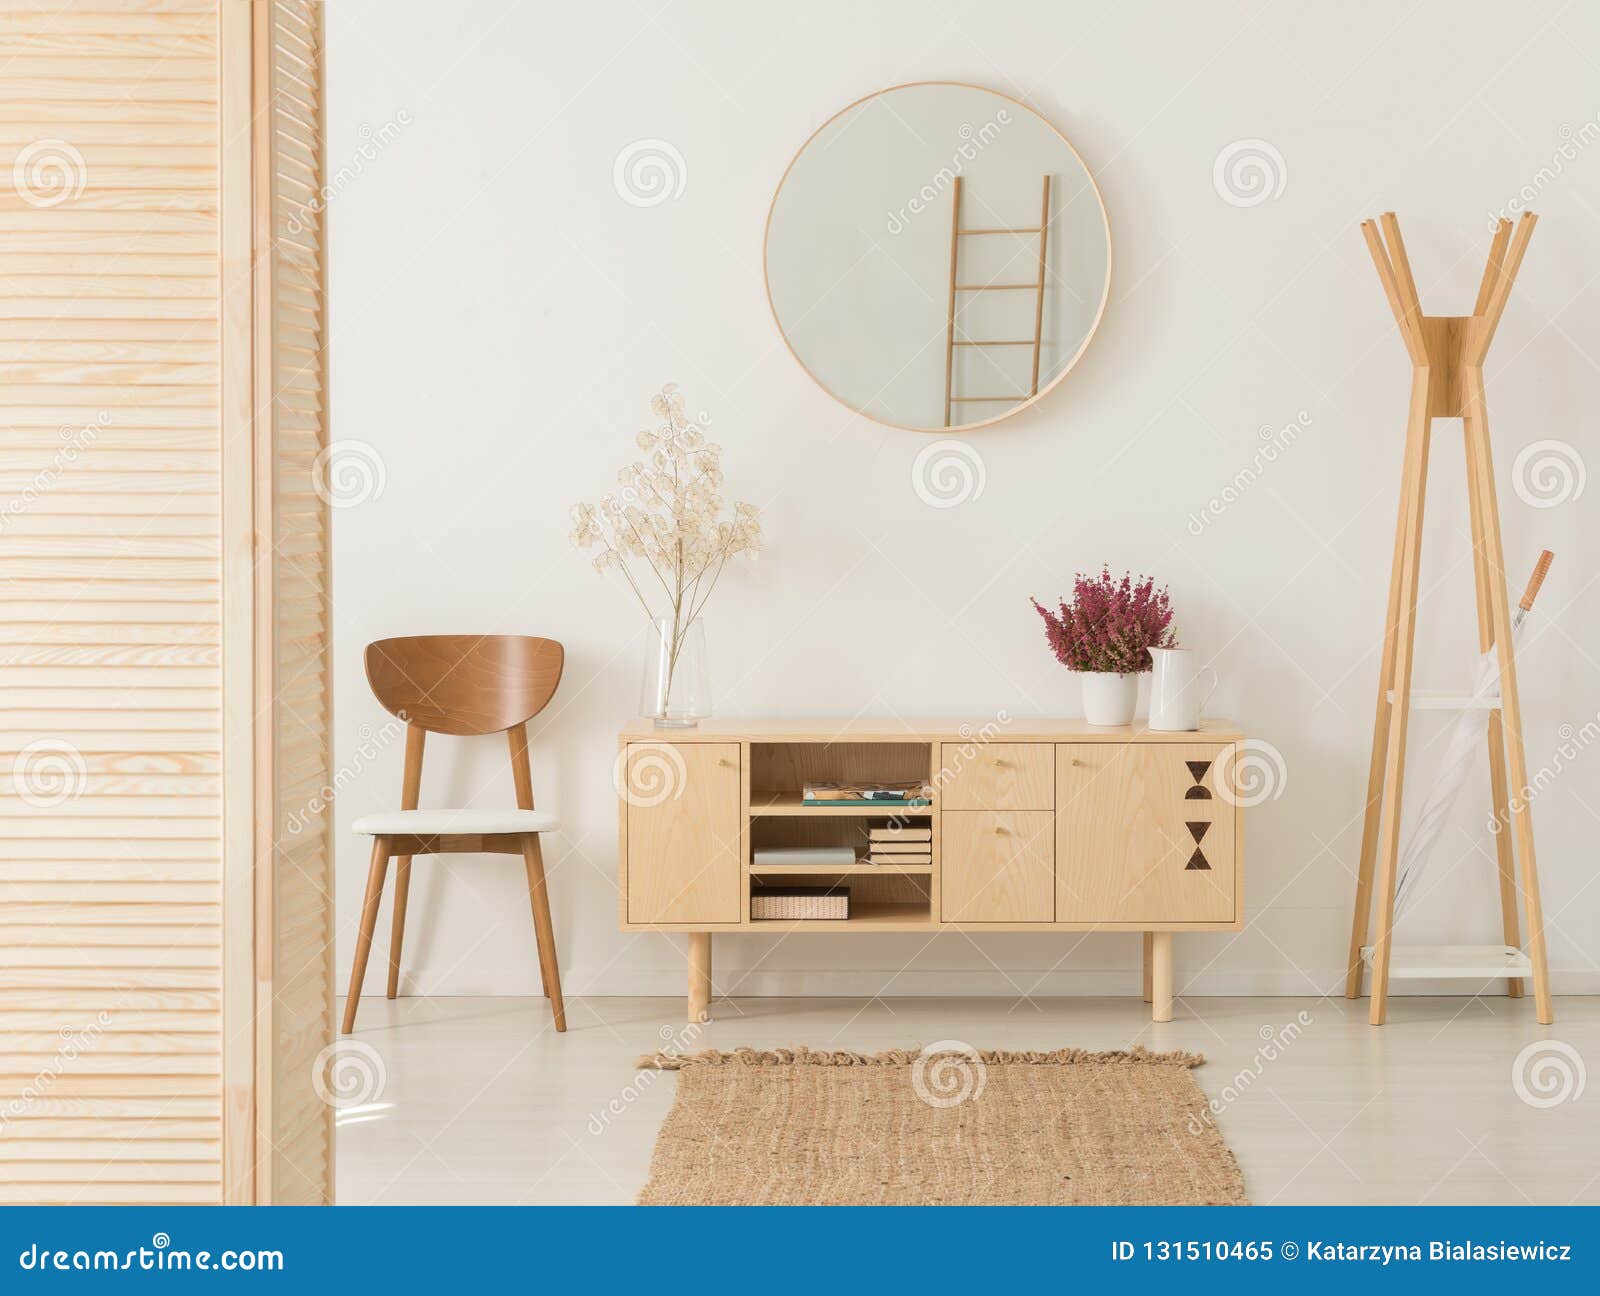 wooden cabinet with flowers between stylish brown chair and wooden hanger